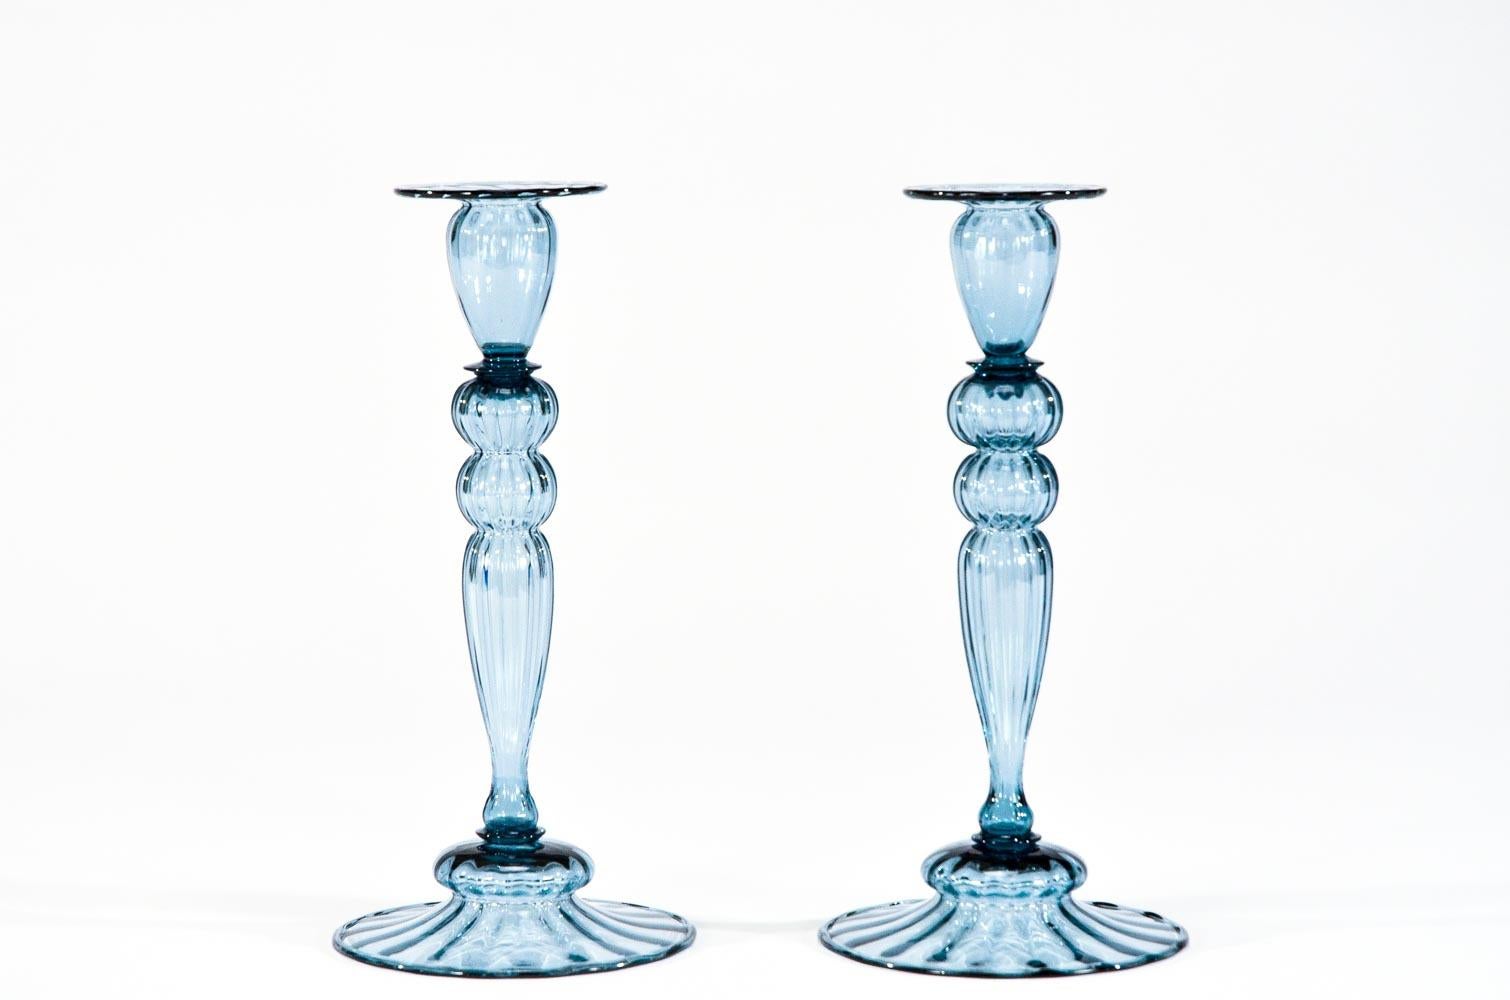 This impressive centerpiece set was made by Steuben and features the most unusual color I call 